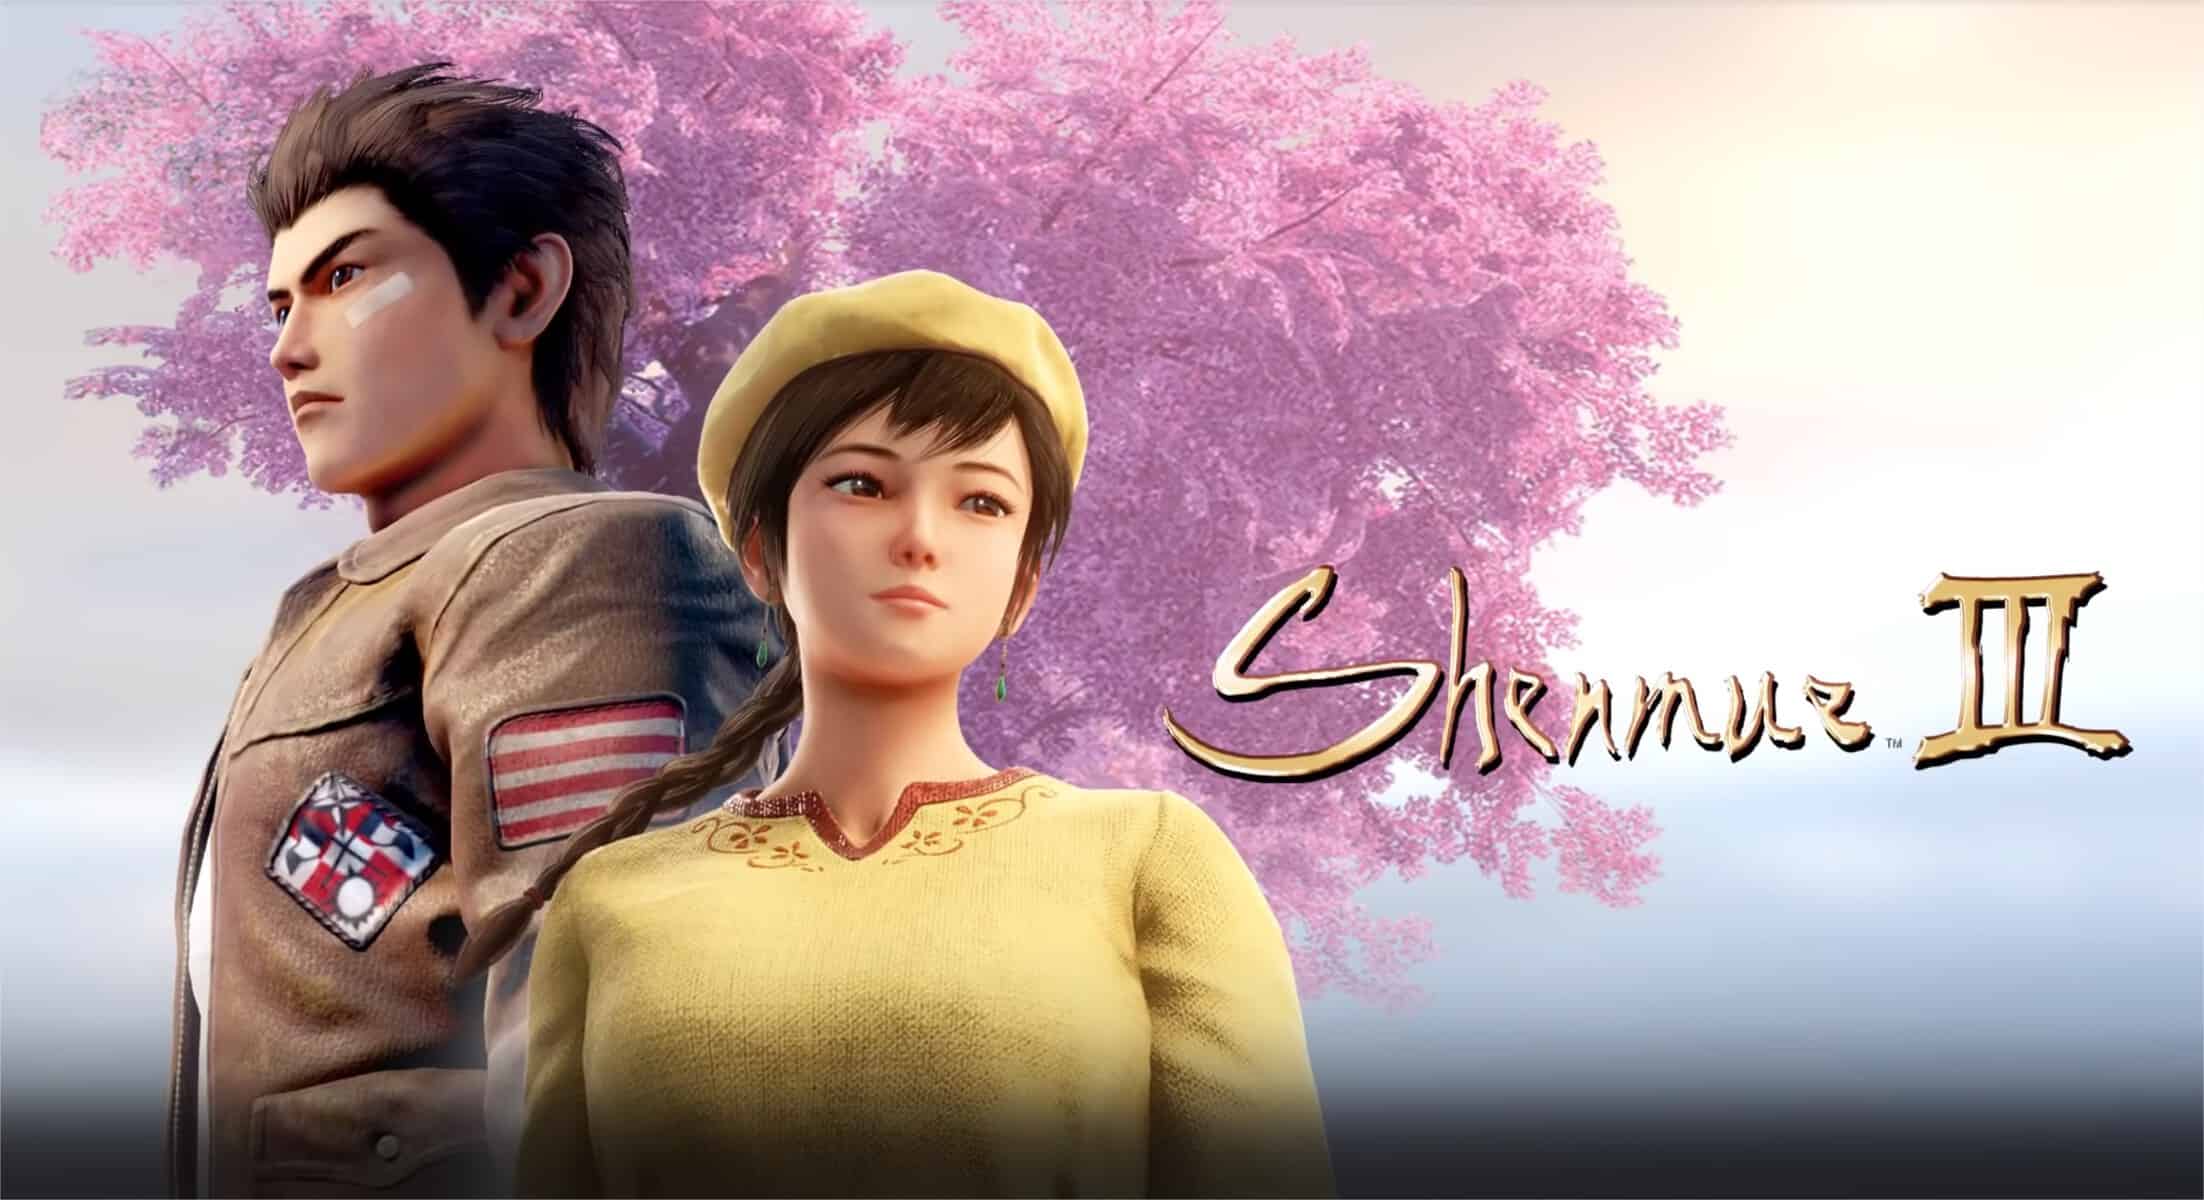 Shenmue 3 cover ryo